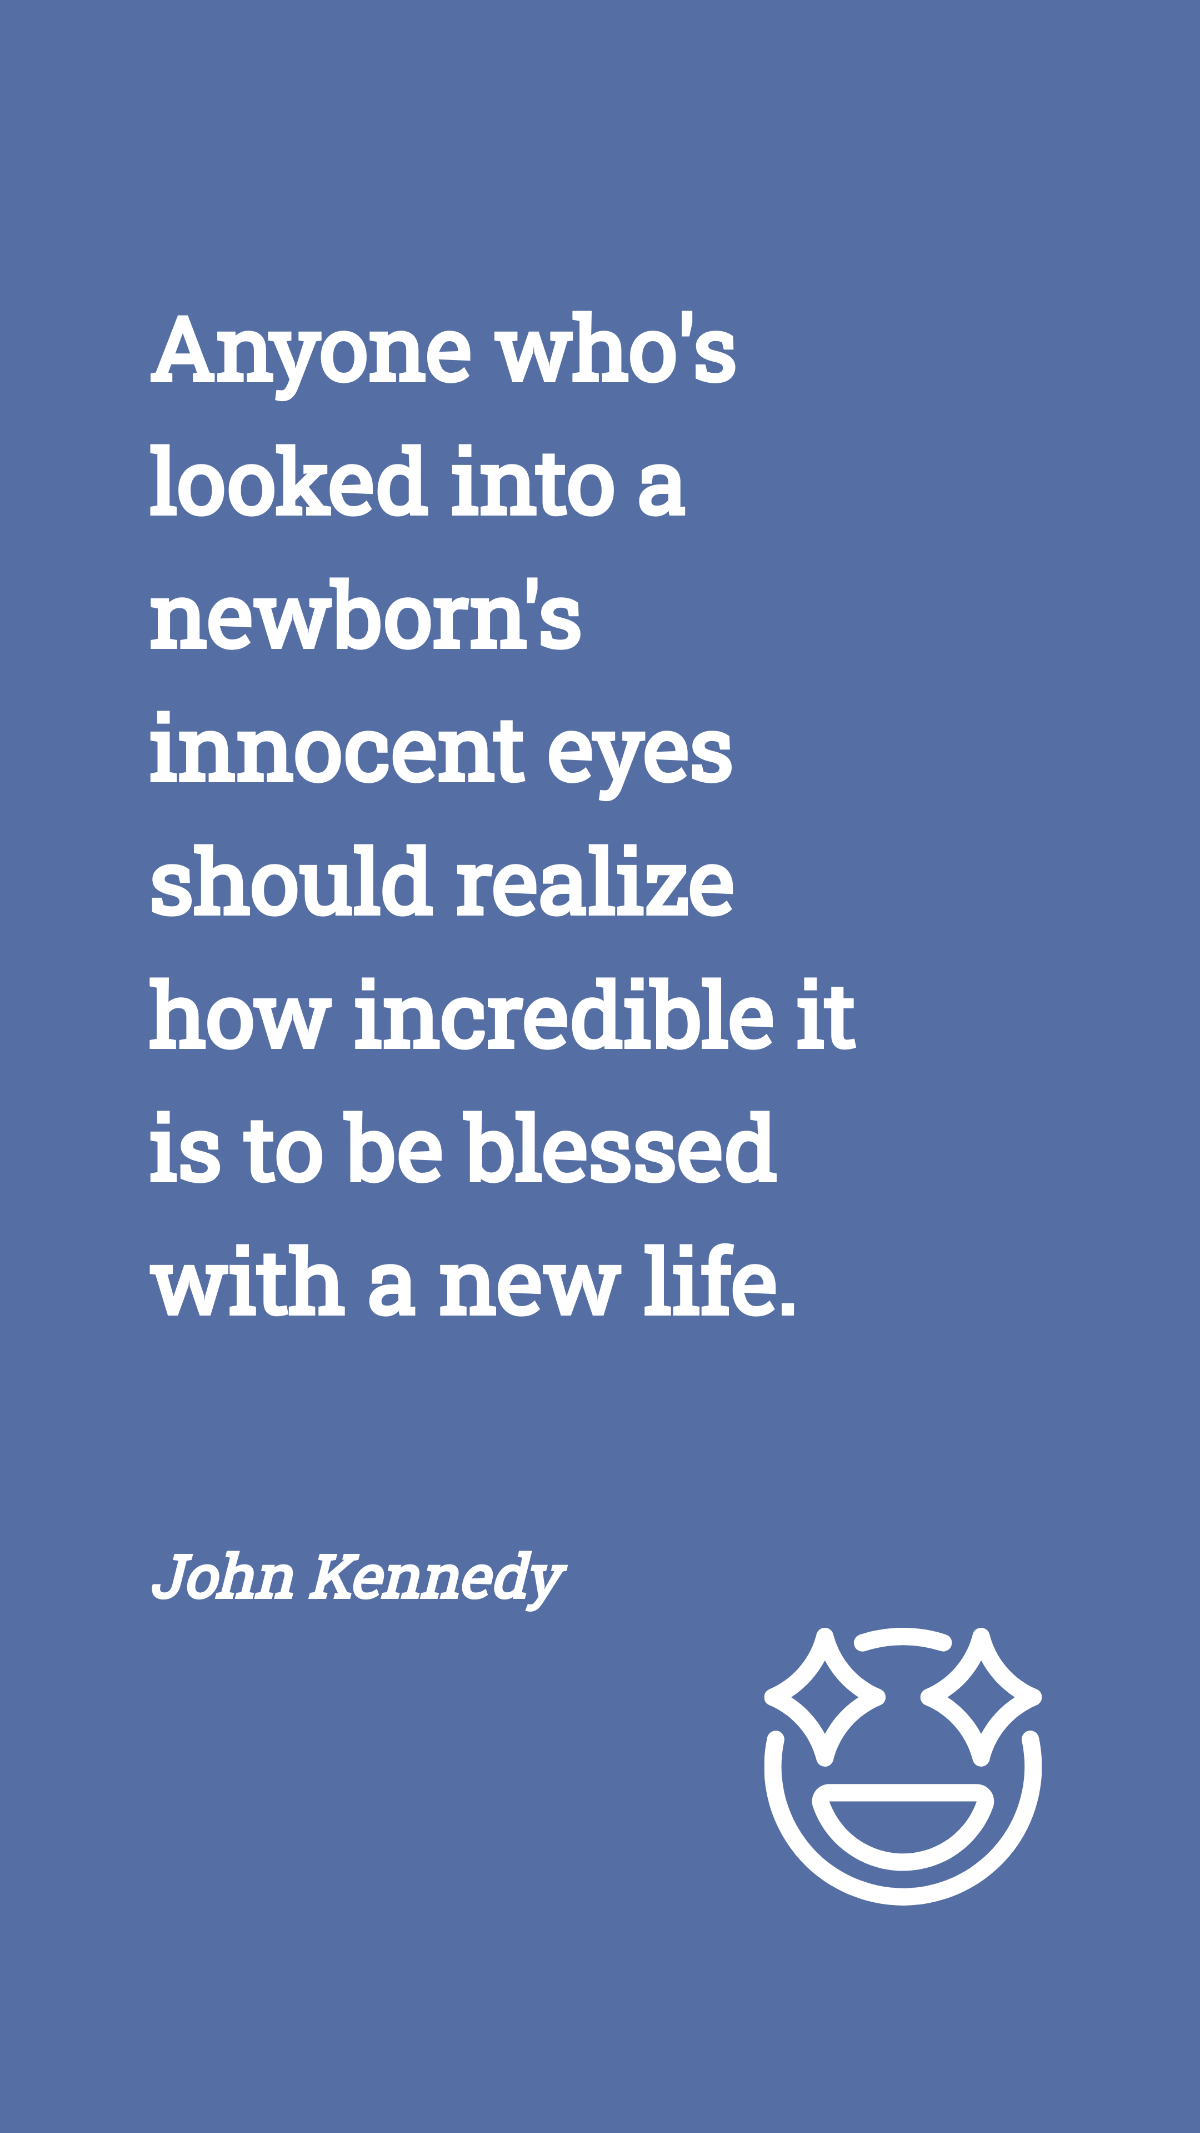 John Kennedy - Anyone who's looked into a newborn's innocent eyes should realize how incredible it is to be blessed with a new life.